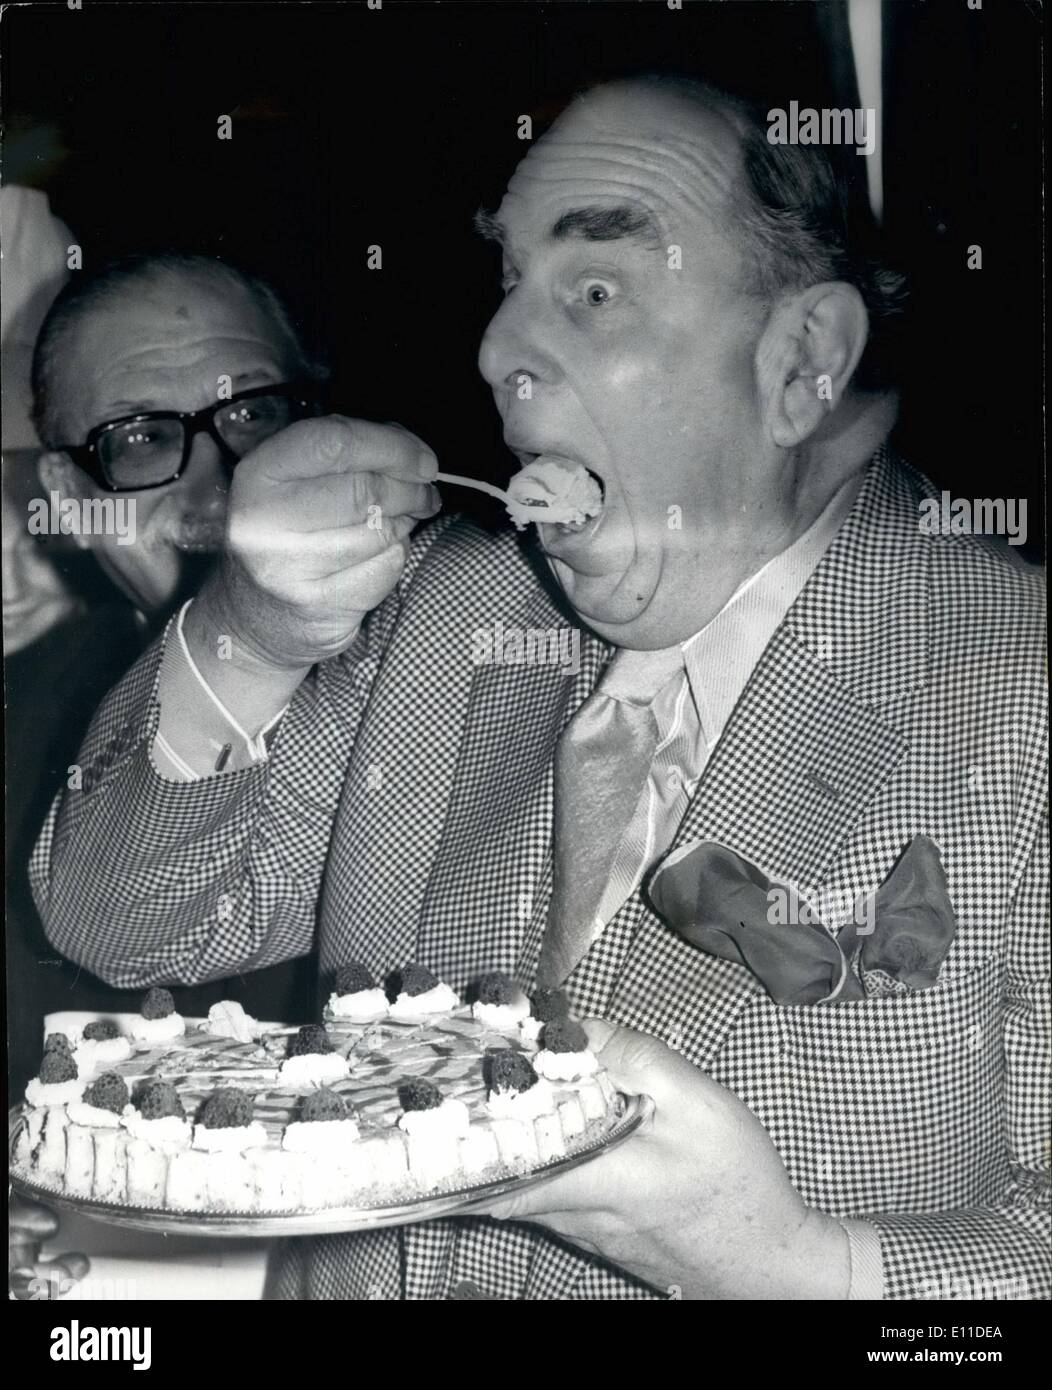 Mar. 03, 1977 - Robert Morley launches the taste of the English pudding: A vote of confidence in English cooking and the English pudding was intro ducted at the launch today by the English Tourist Board's 1977 Taste of England campaign. The launch was held at the Fishmongers' Hall in London, following a buffet lunch, took the form of a Great English Pudding tasting, a unique gastronomic occasion at which actor Robert Morley took the role of taster in chief. Photo shows actor Robert Morley seen tasting a pudding called 'Bliss' Stock Photo